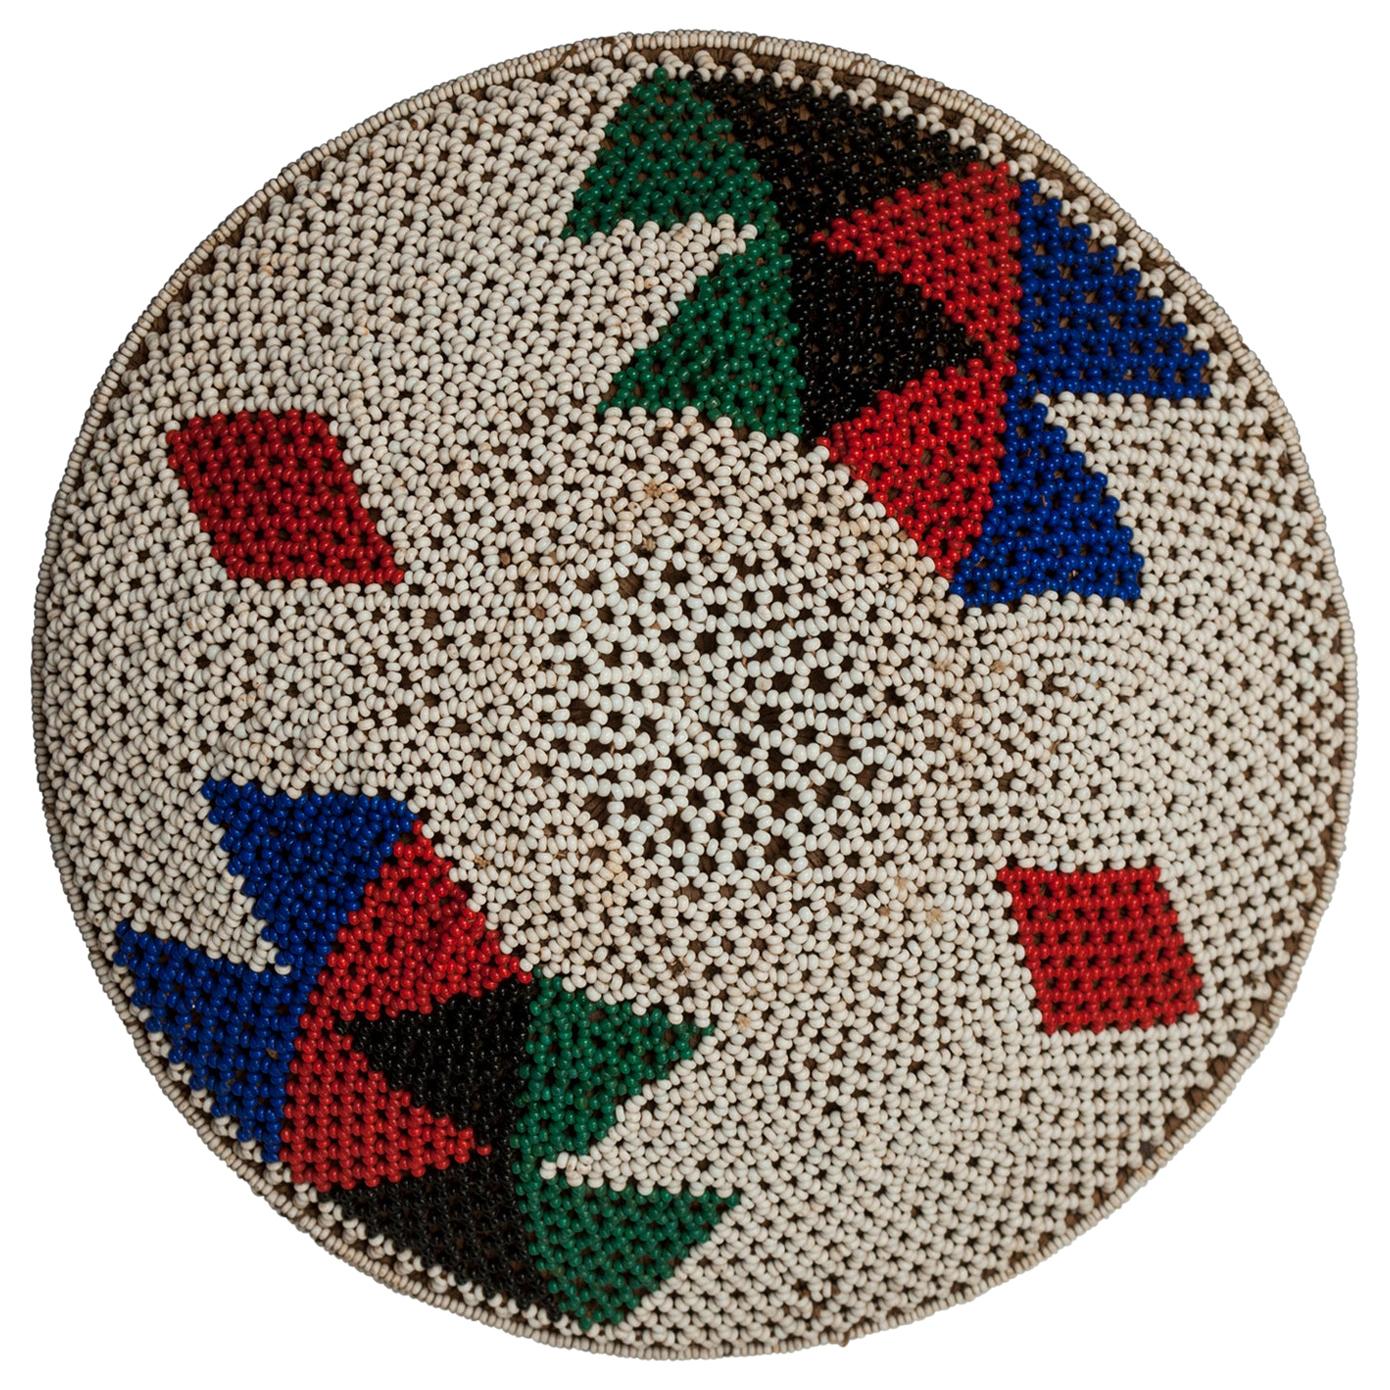 Mid-20th Century Beer Pot Cover ‘Imbengi’ Zulu People, South Africa